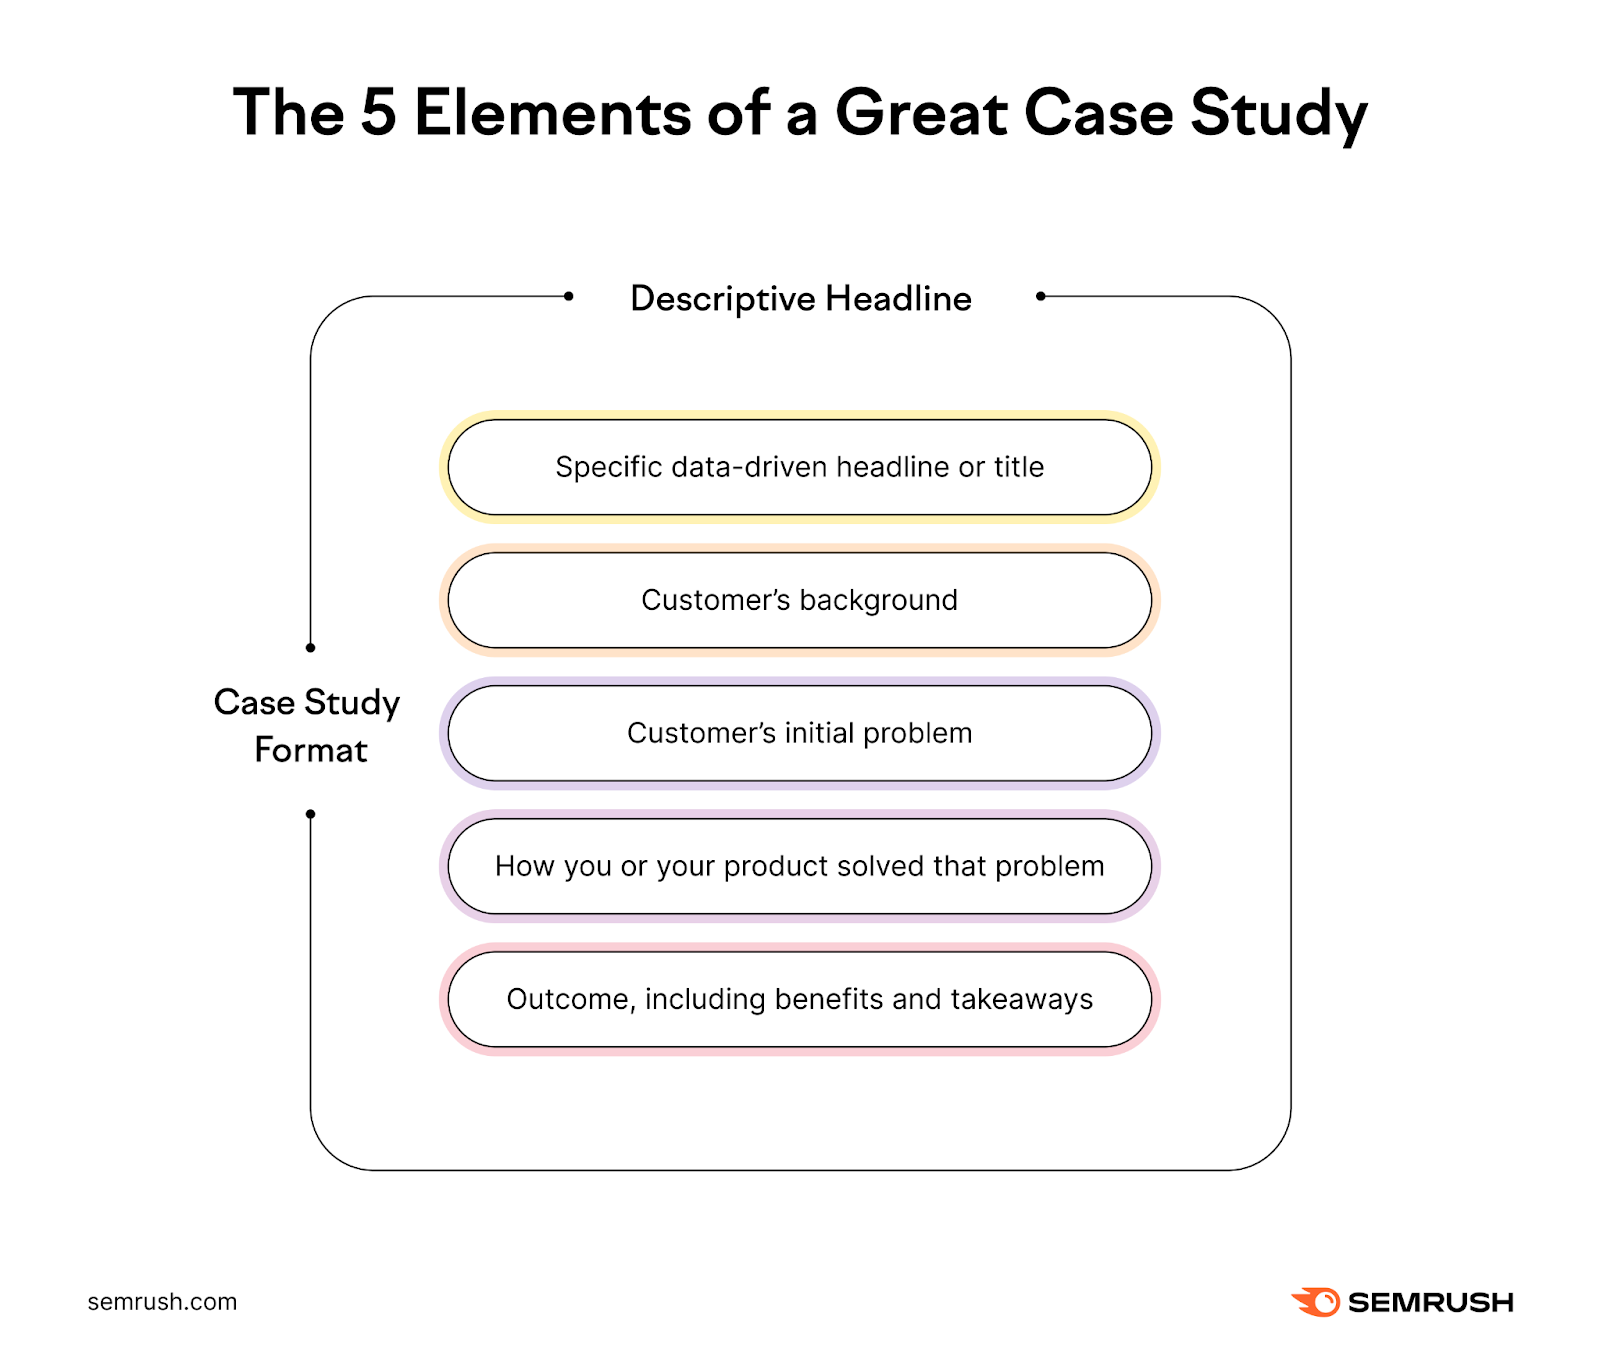 Elements of a case study: headline, customer background, customer problem, how you solved the problem, the customer outcome